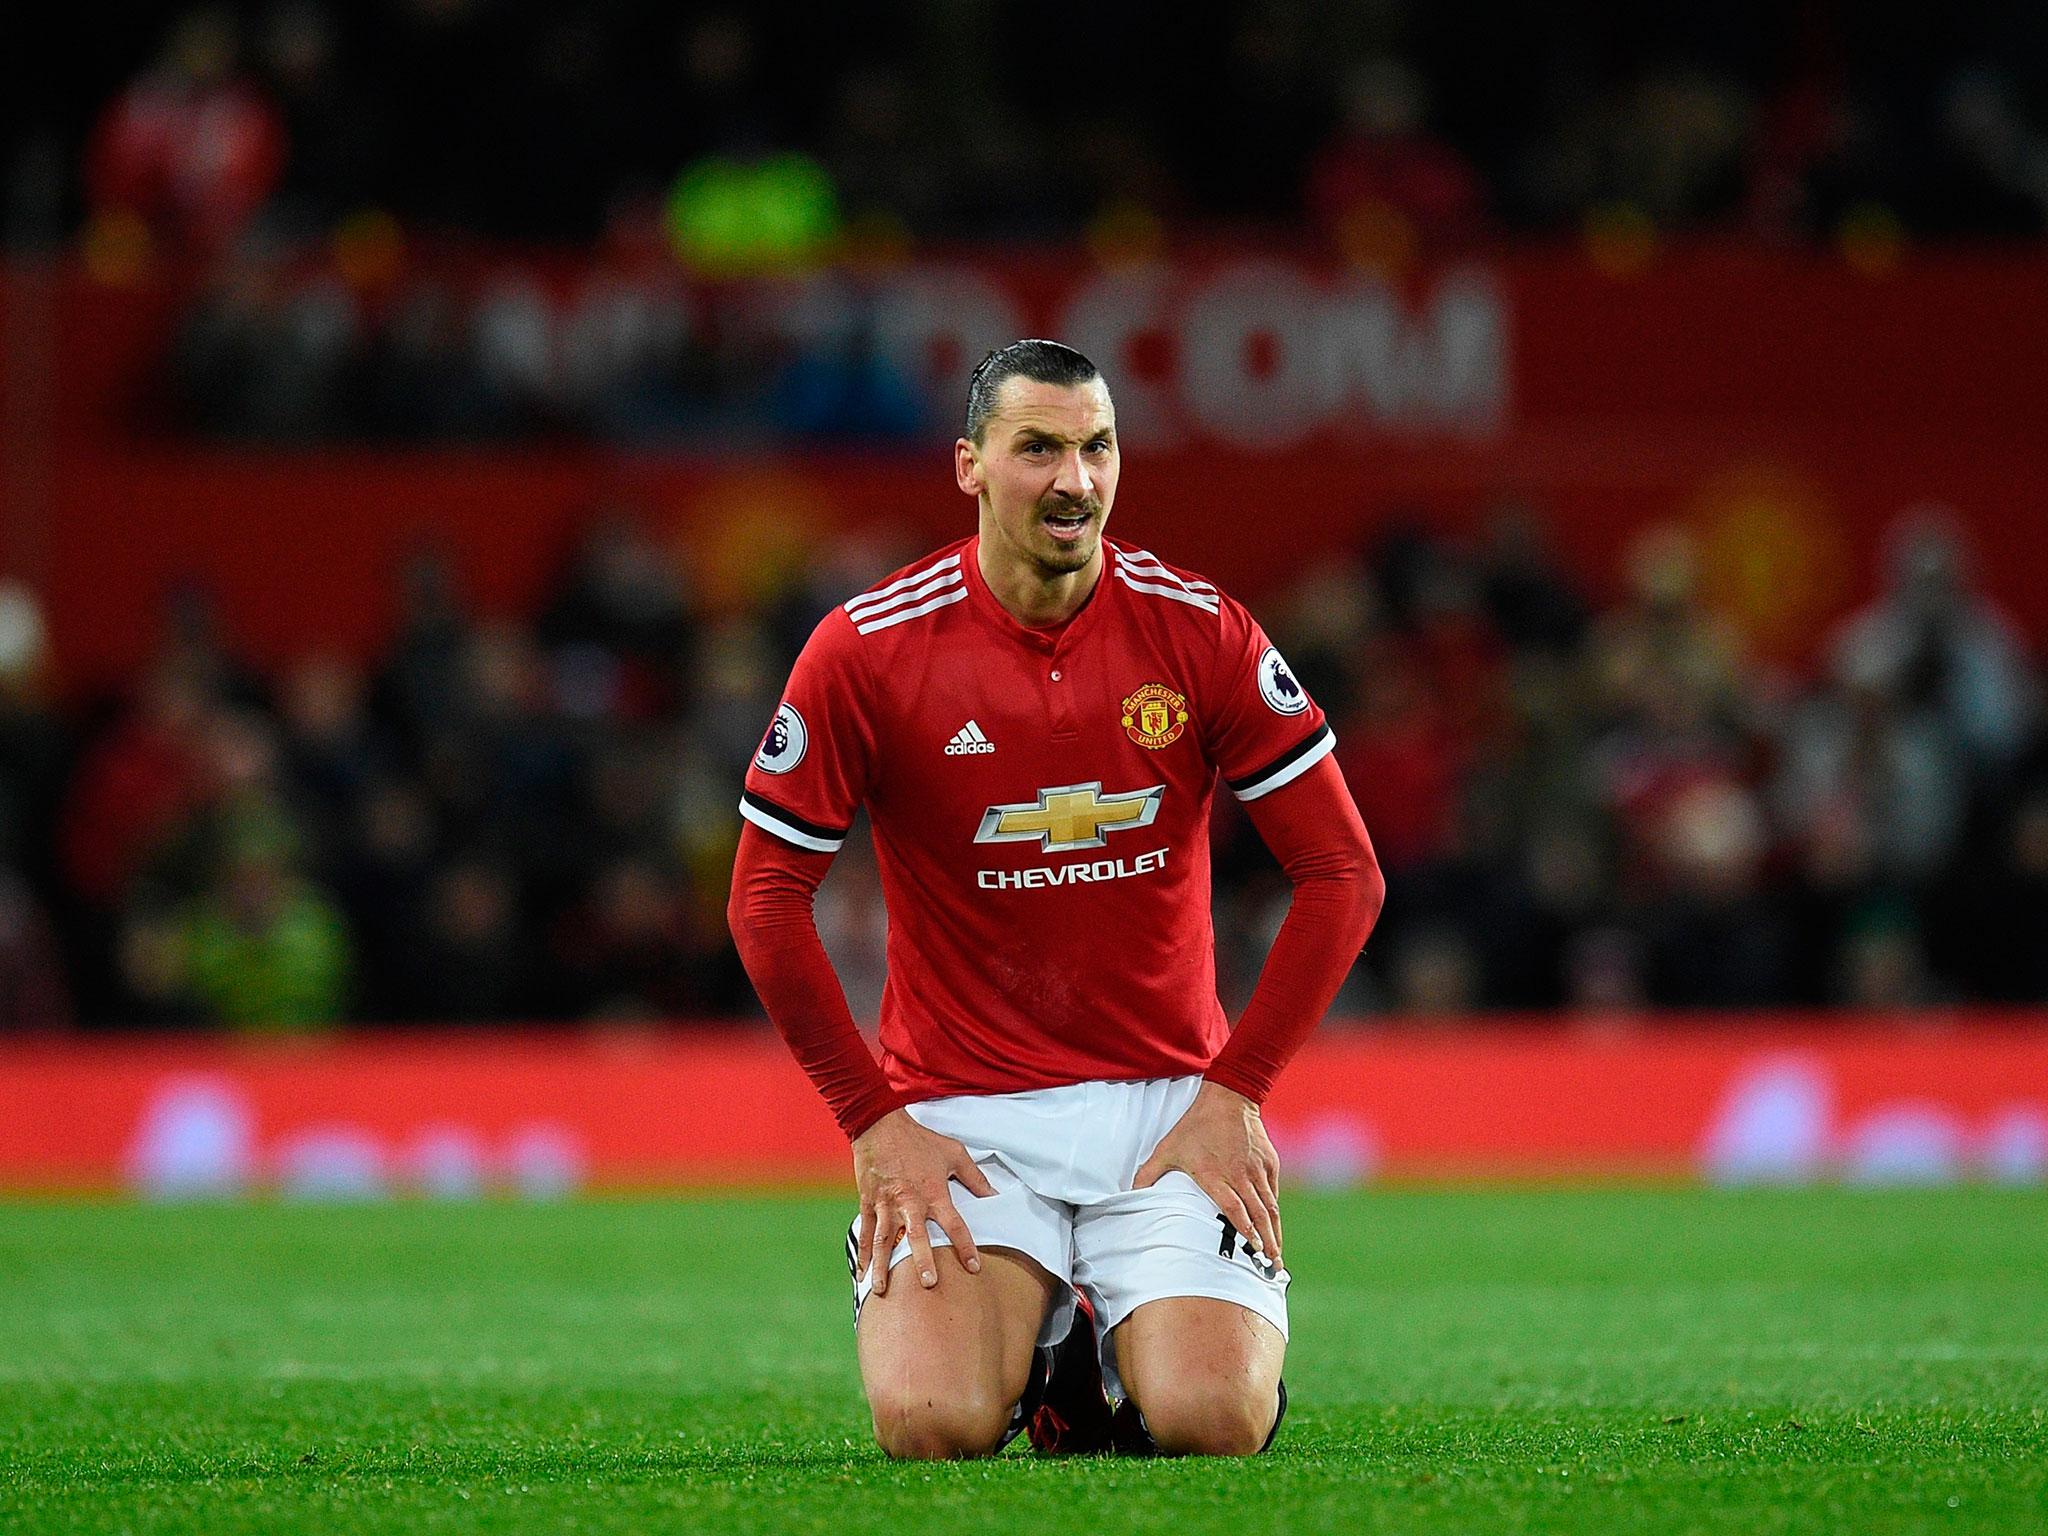 Zlatan Ibrahimovic is still working to regain full fitness and form